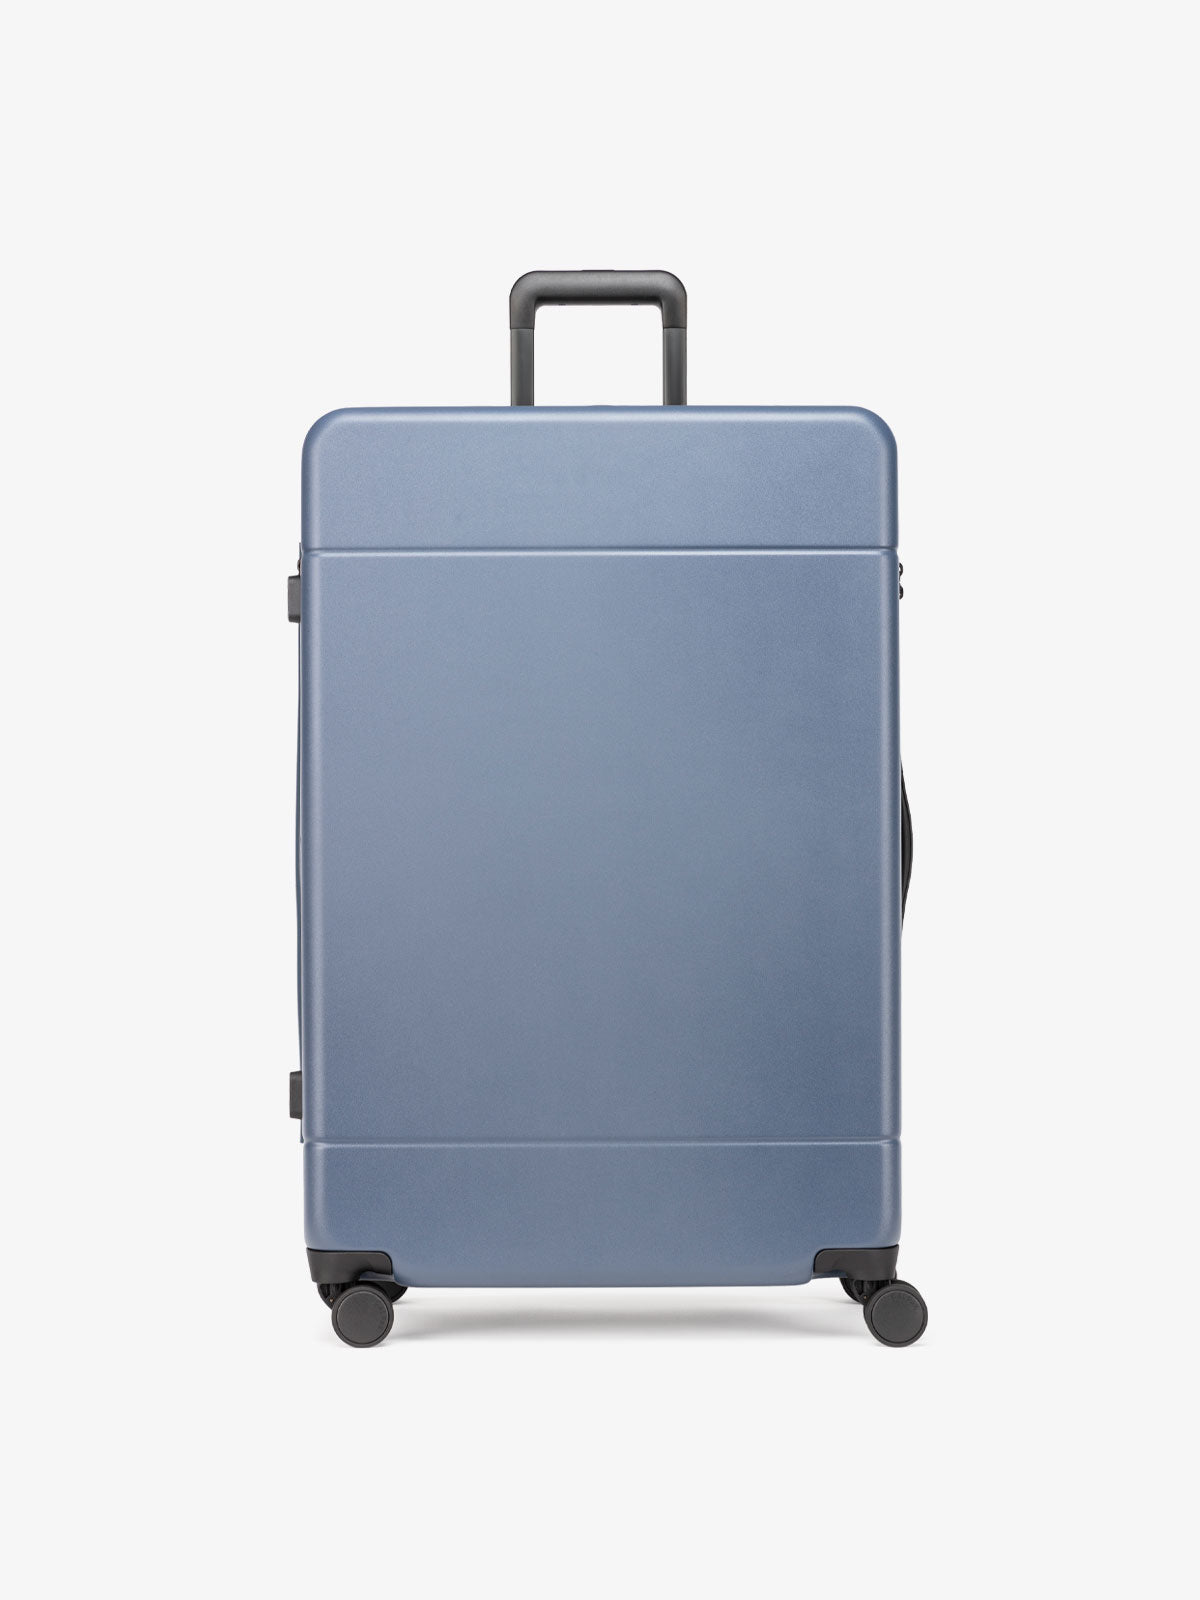 large 30 inch durable hard shell polycarbonate blue atlantic luggage from CALPAK Hue collection